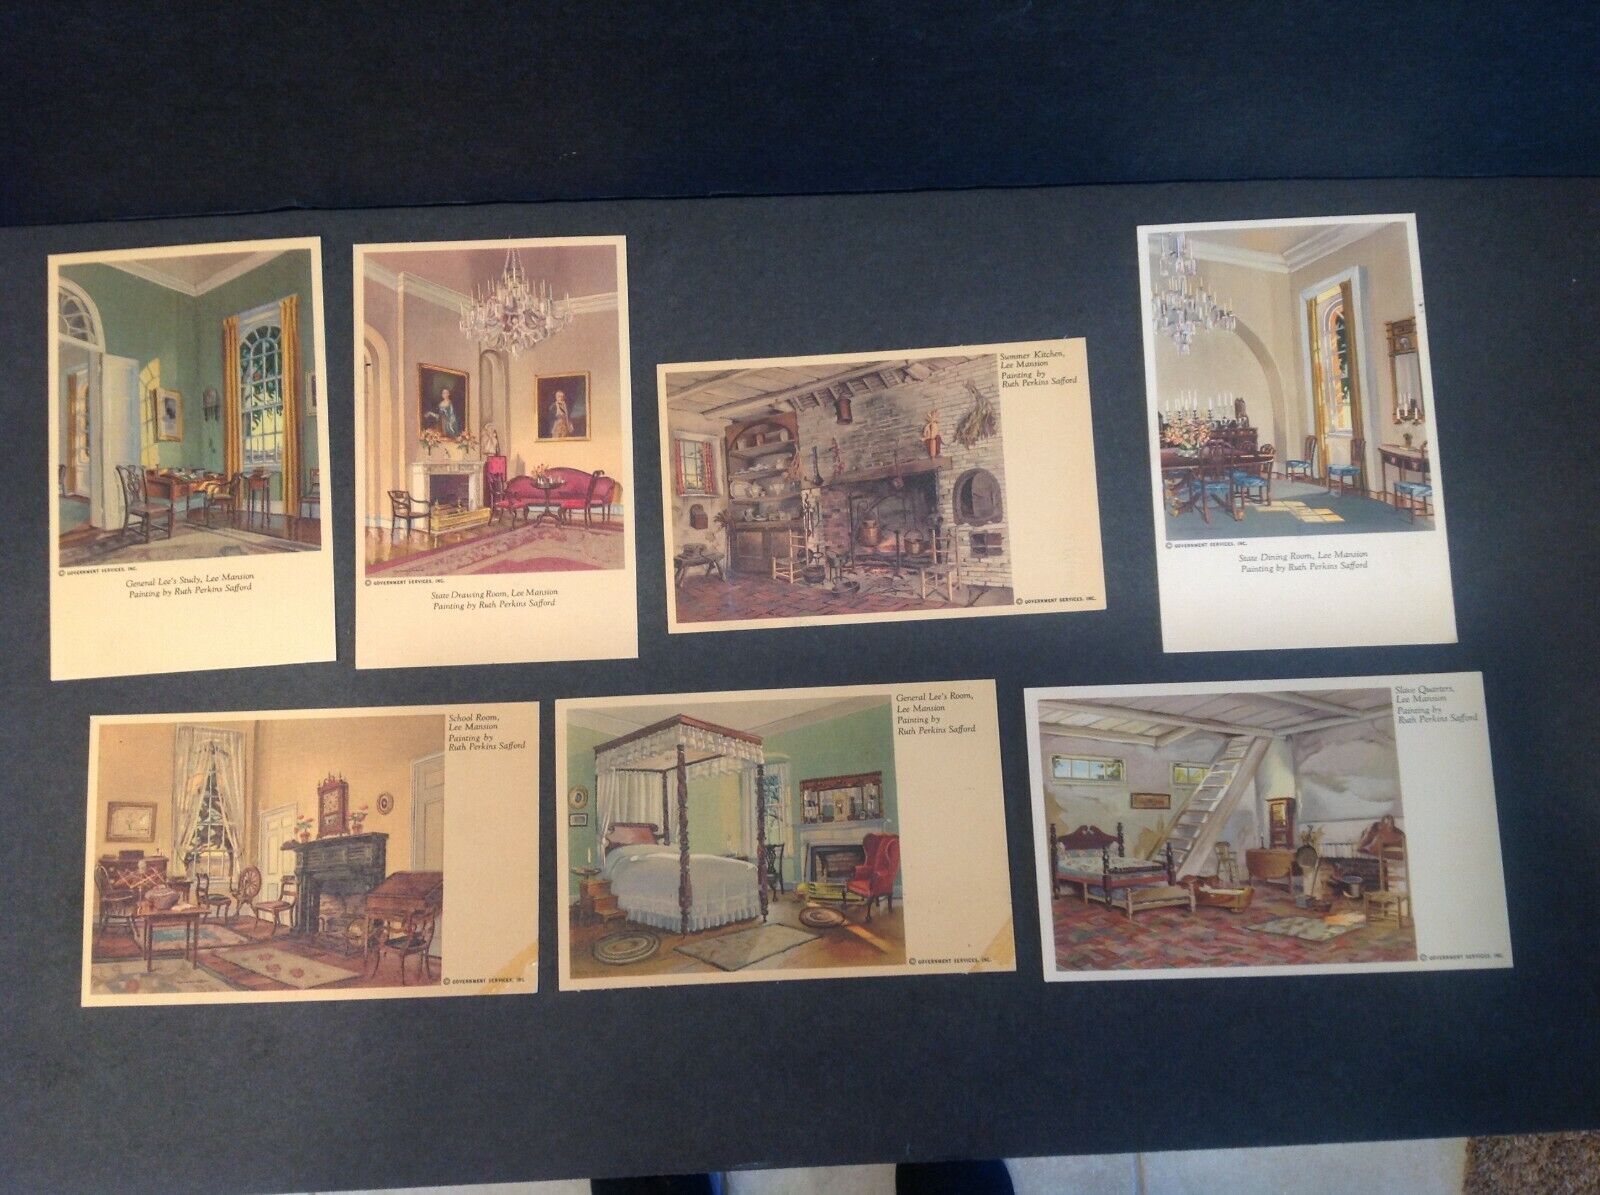 NOS Postcard Lot-Lee Mansion Paintings by Ruth Perkins Safford